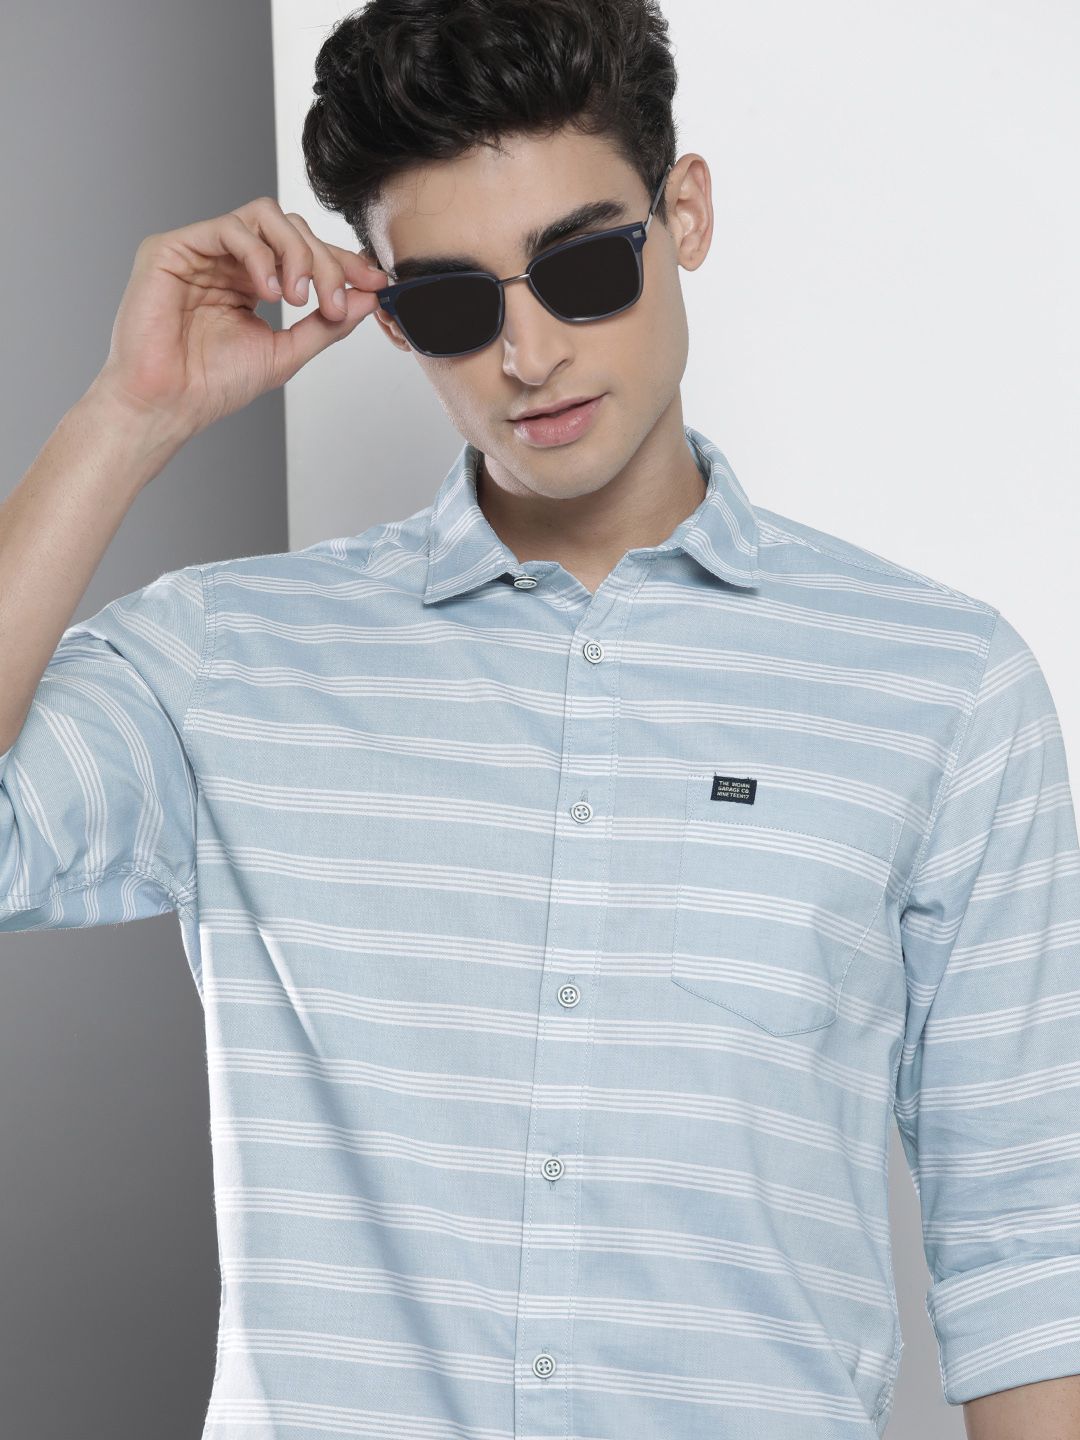 The Indian Garage Co Men Blue & White Classic Slim Fit Striped Casual Shirt